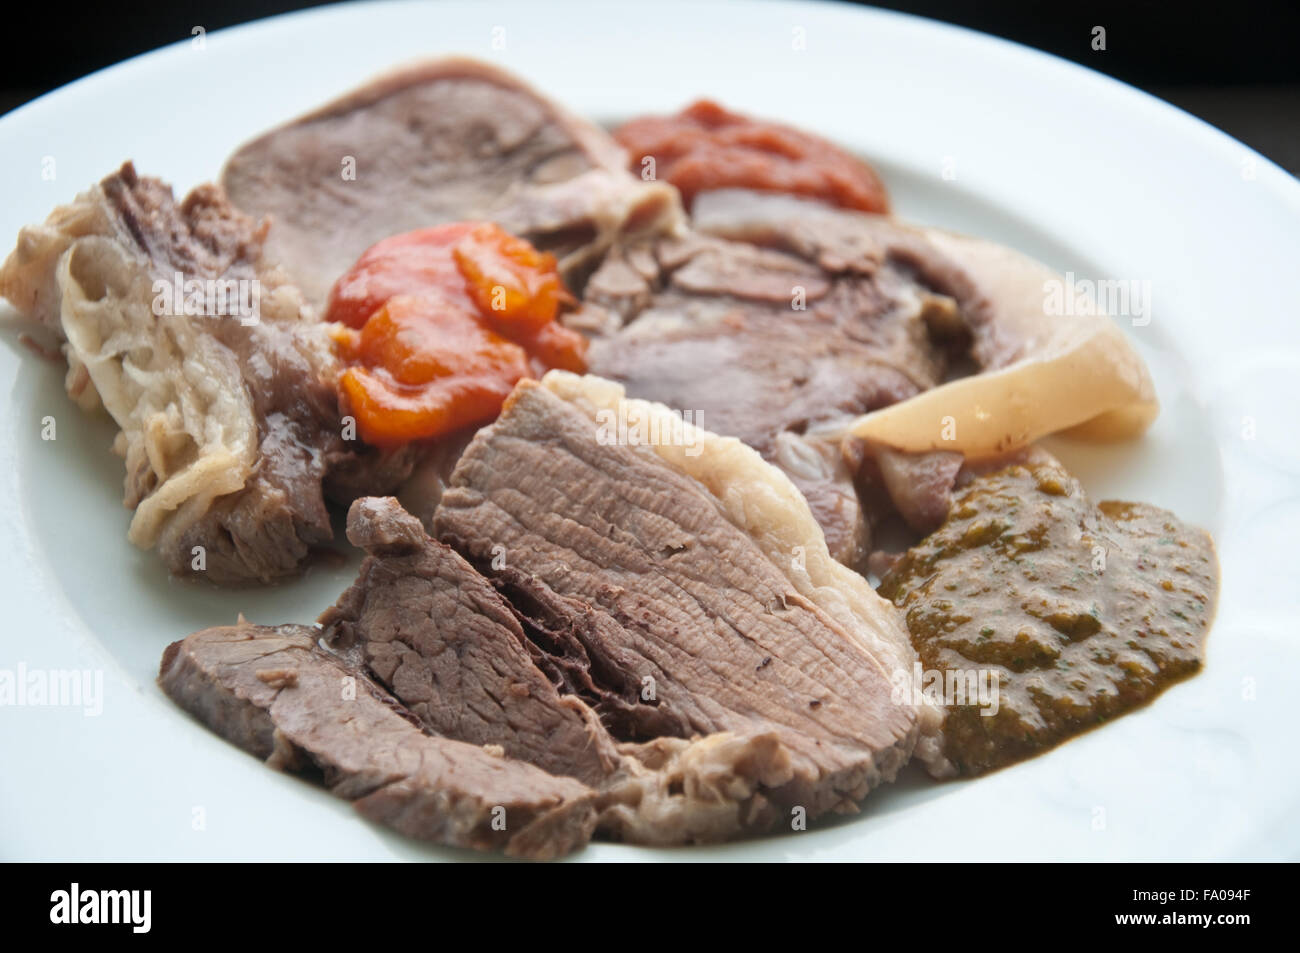 Boiled meat typical Piedmontese dish with calf's head, beef tongue, beef biancostato,italy Stock Photo